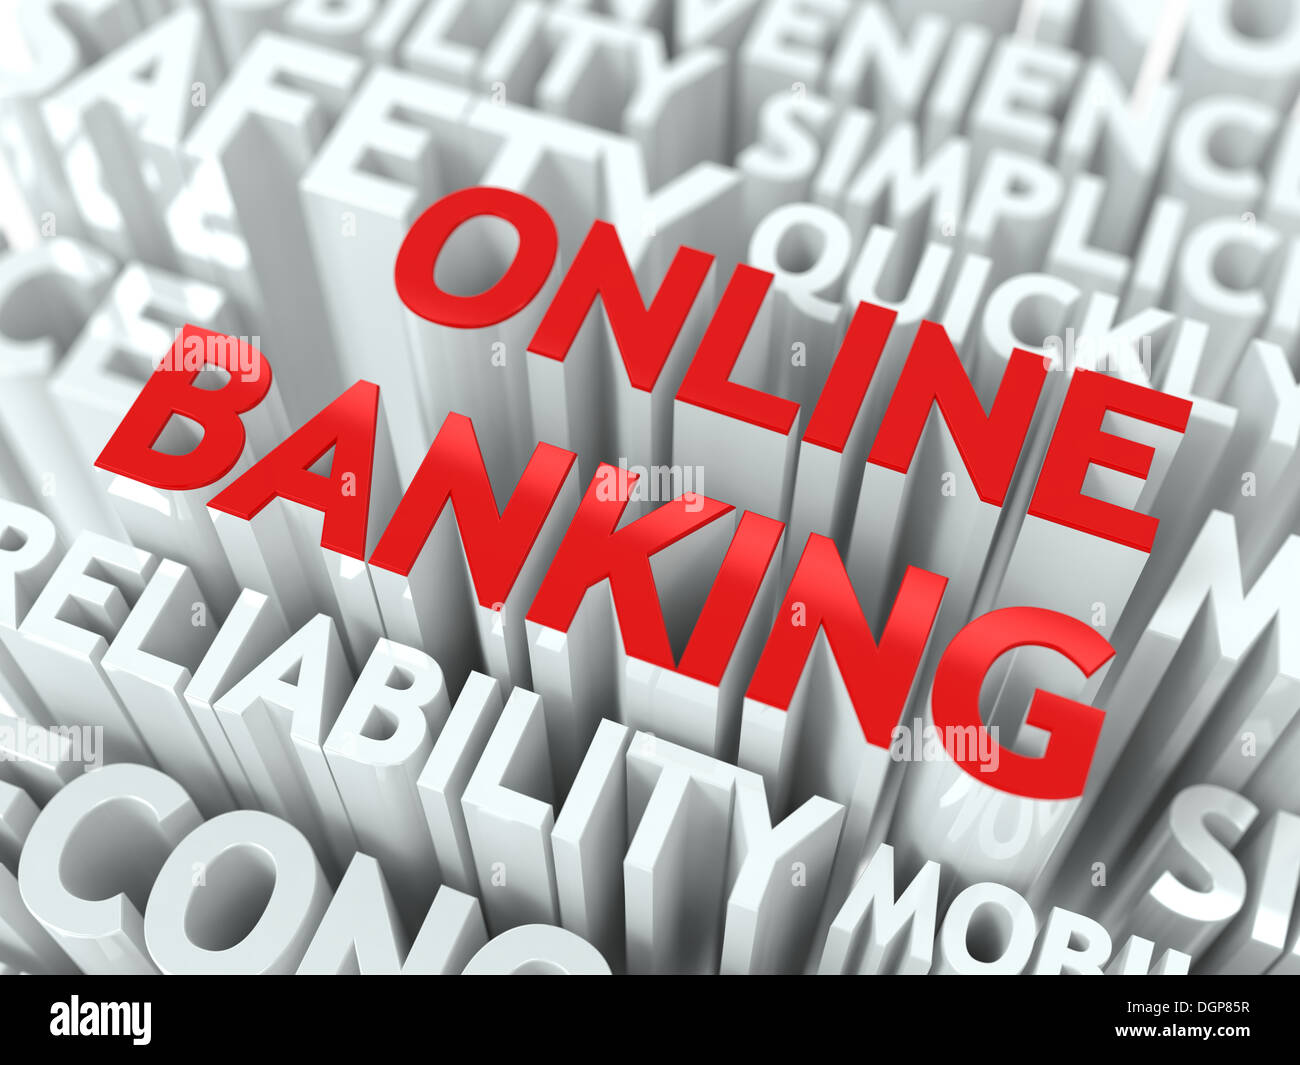 Online Banking Concept. Stock Photo